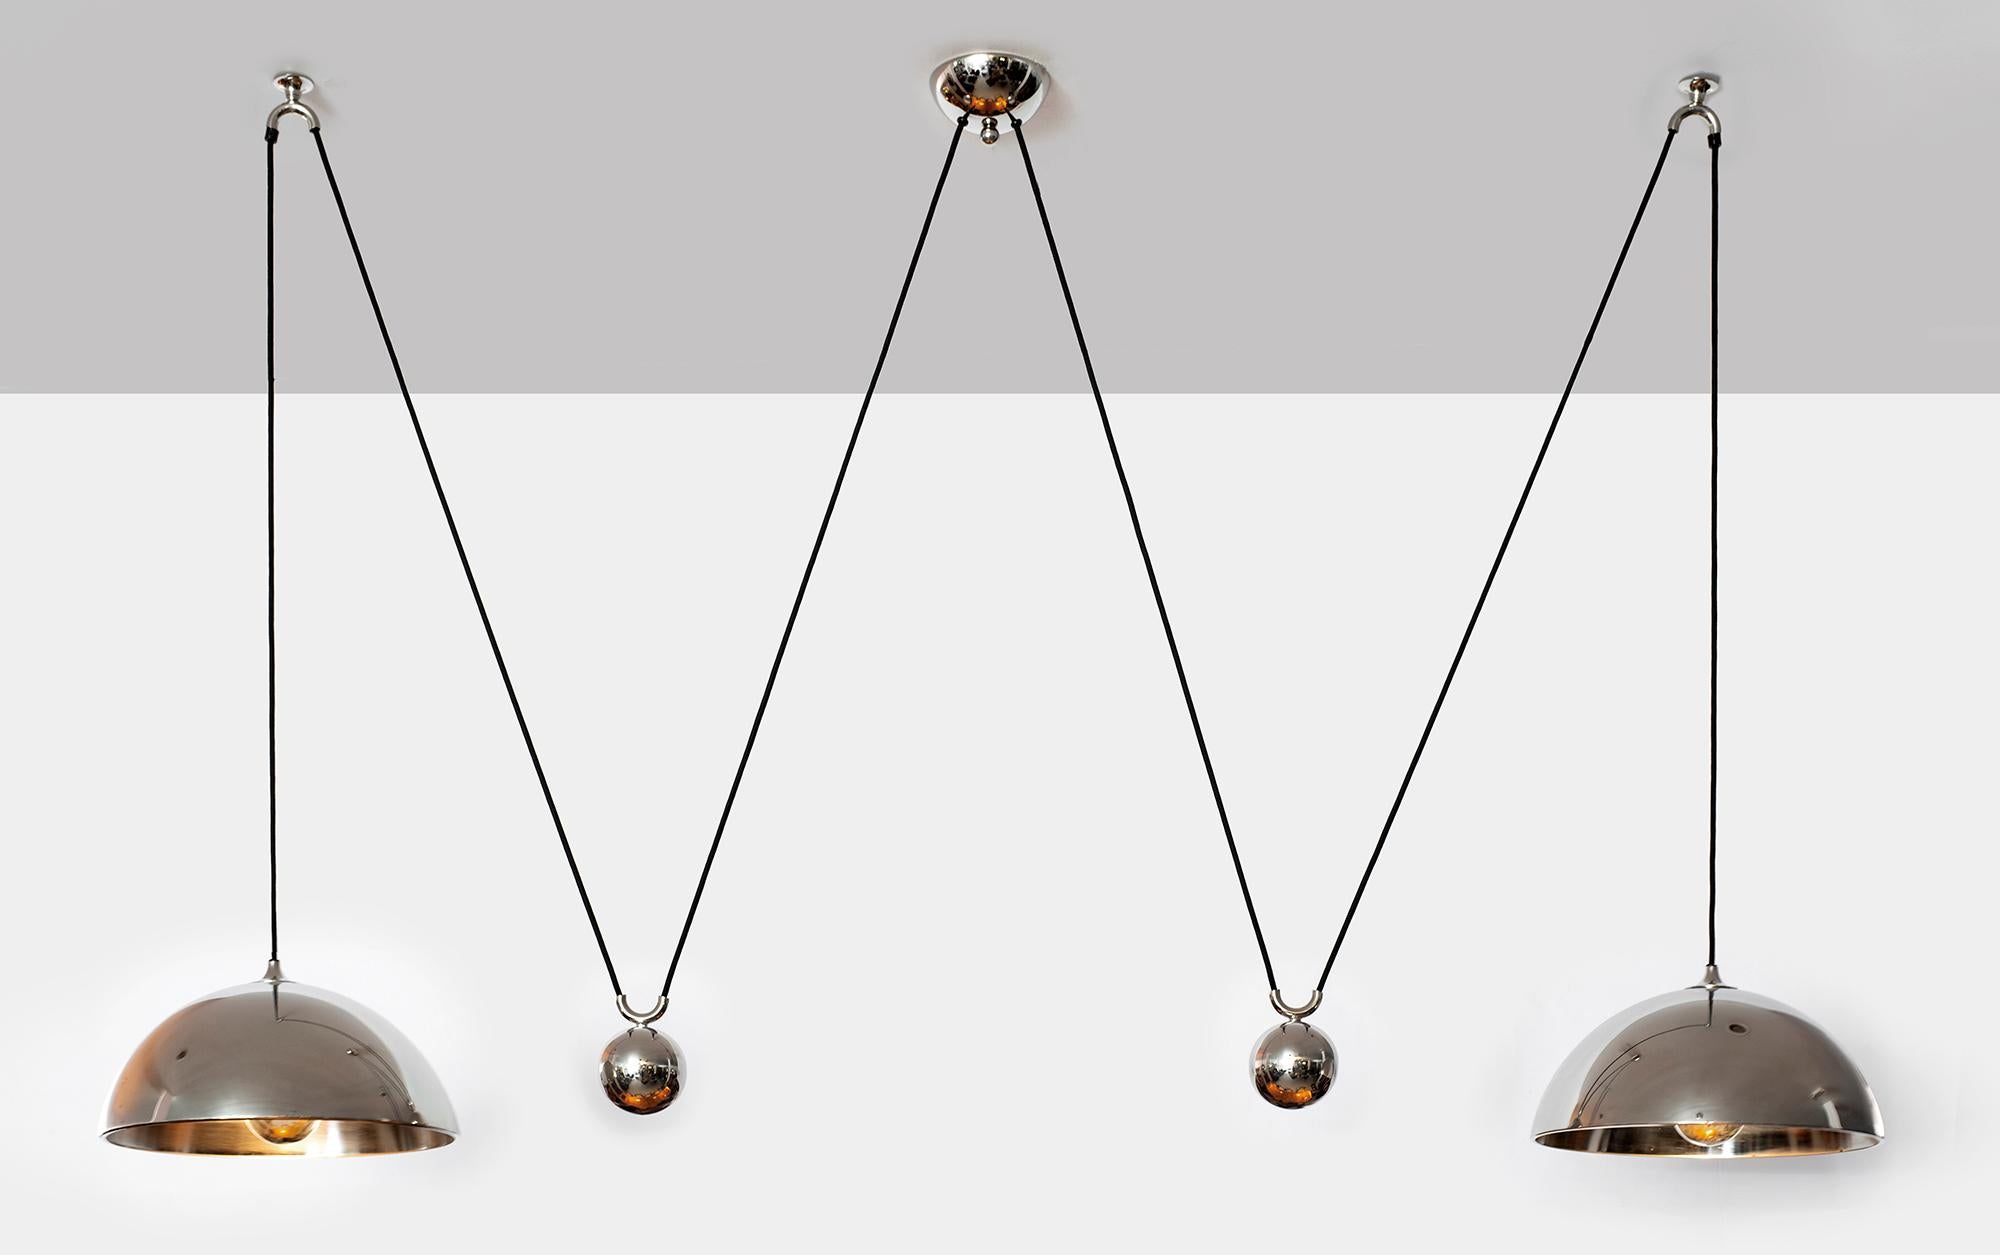 Double counterbalance pendant by Florian Schulz. Two nickel pendants suspended, each with their own nickel ball counter balance pulley system. One centre canopy supports both pendants. Each light is adjustable in height without effecting the other.